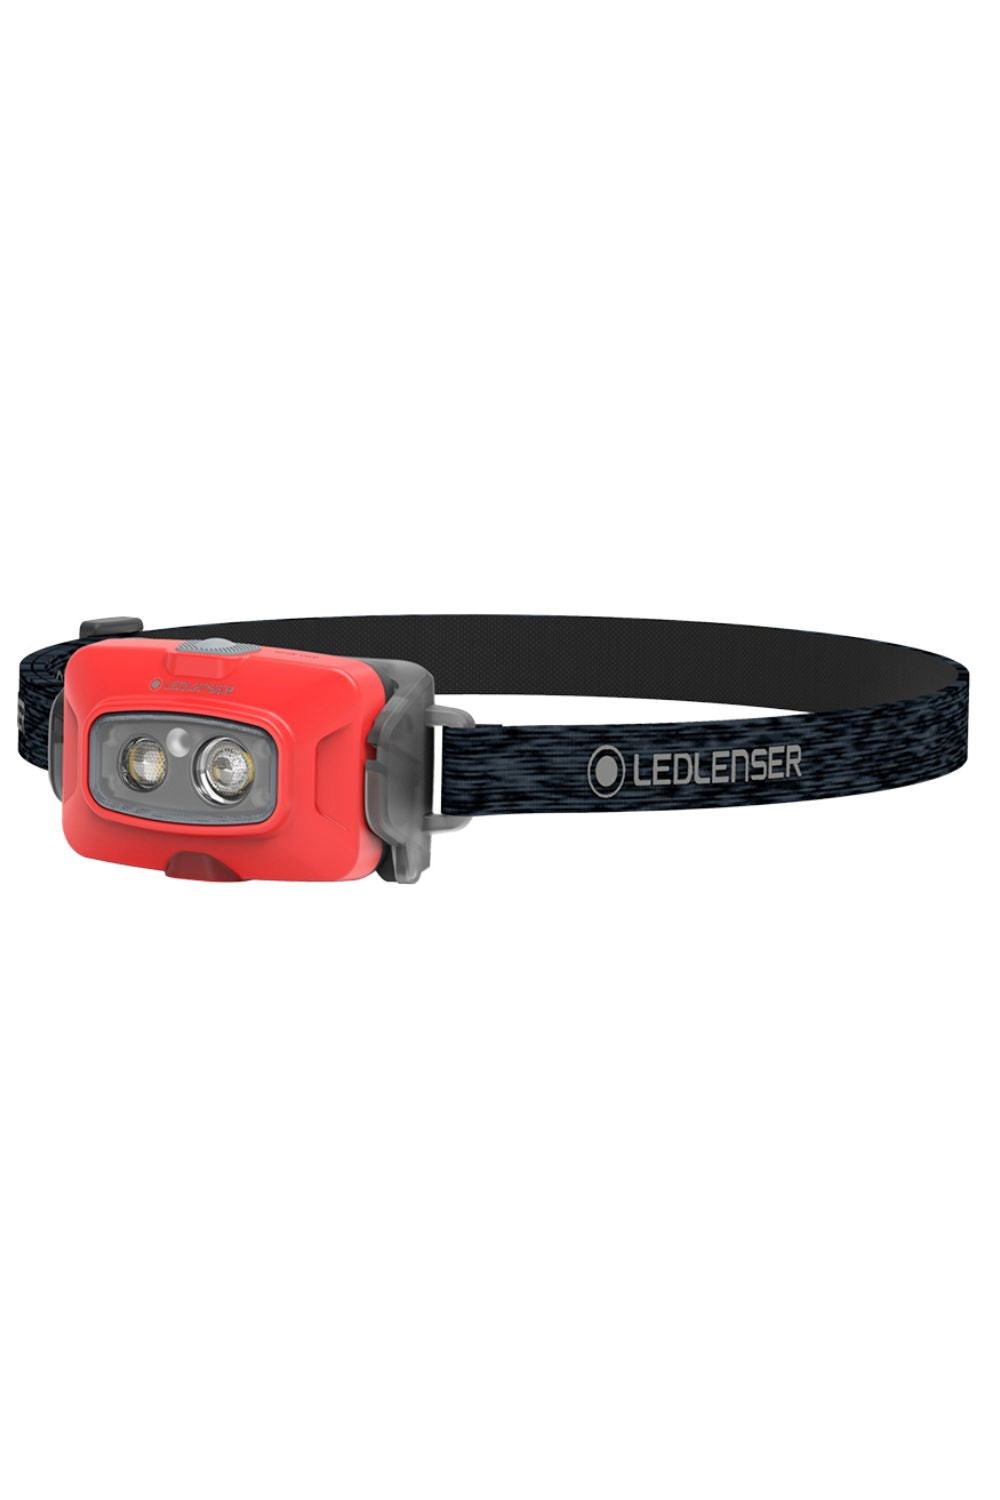 HF4R Core Rechargable 500lm LED Head Torch -